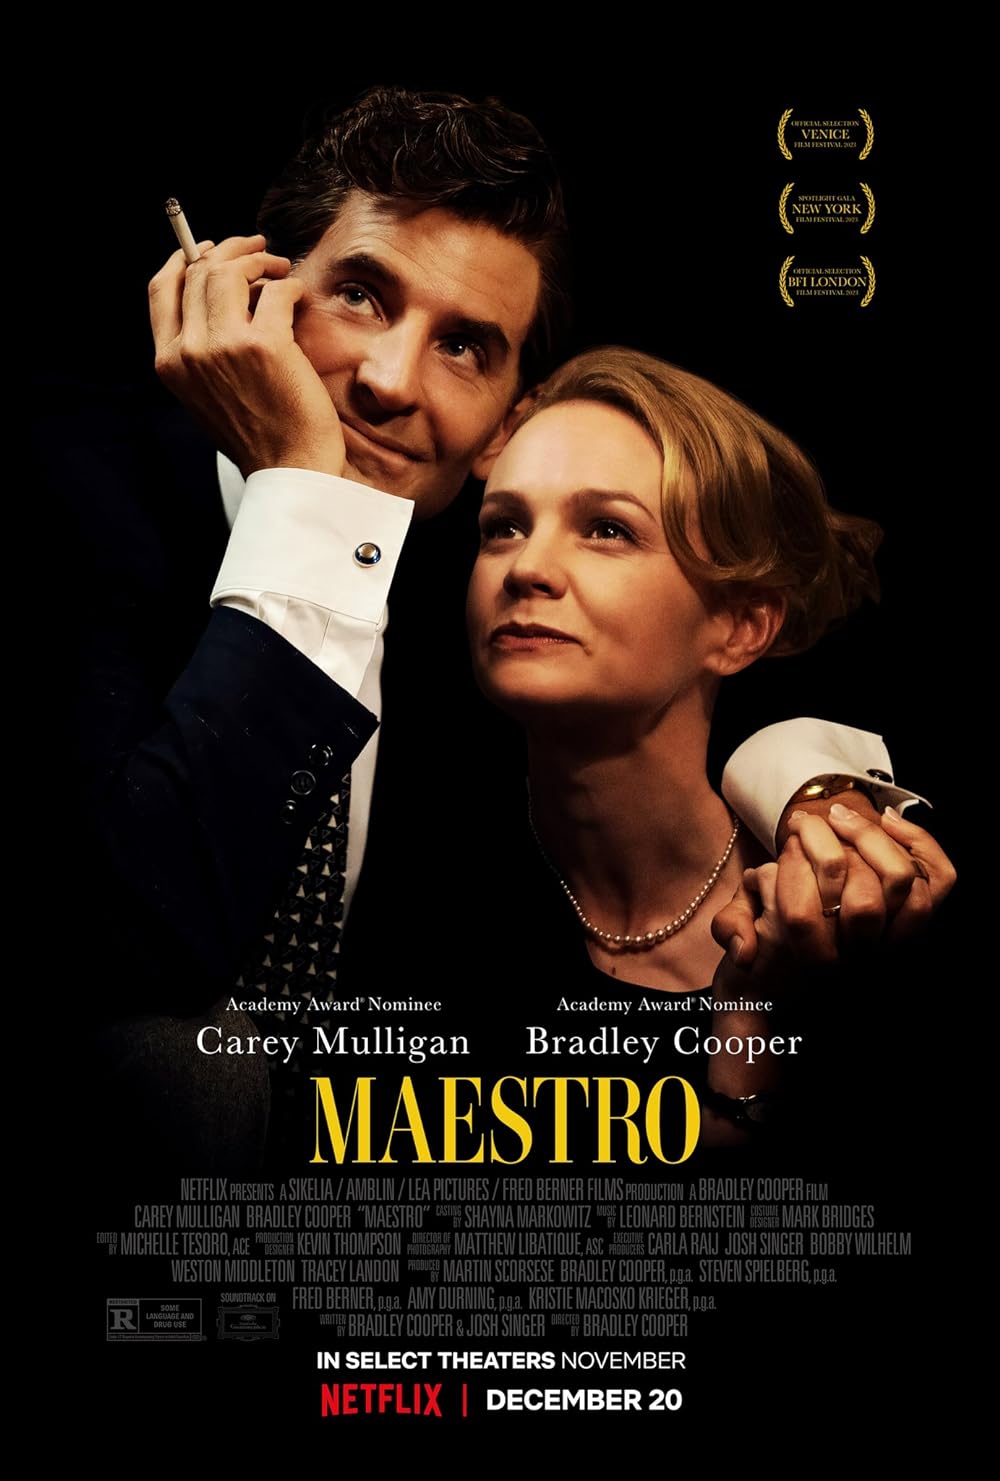 “Maestro” by Bradley Cooper, Steven Spielberg, Fred Berner, Amy Durning and Kristie Macosko Krieger, Producers